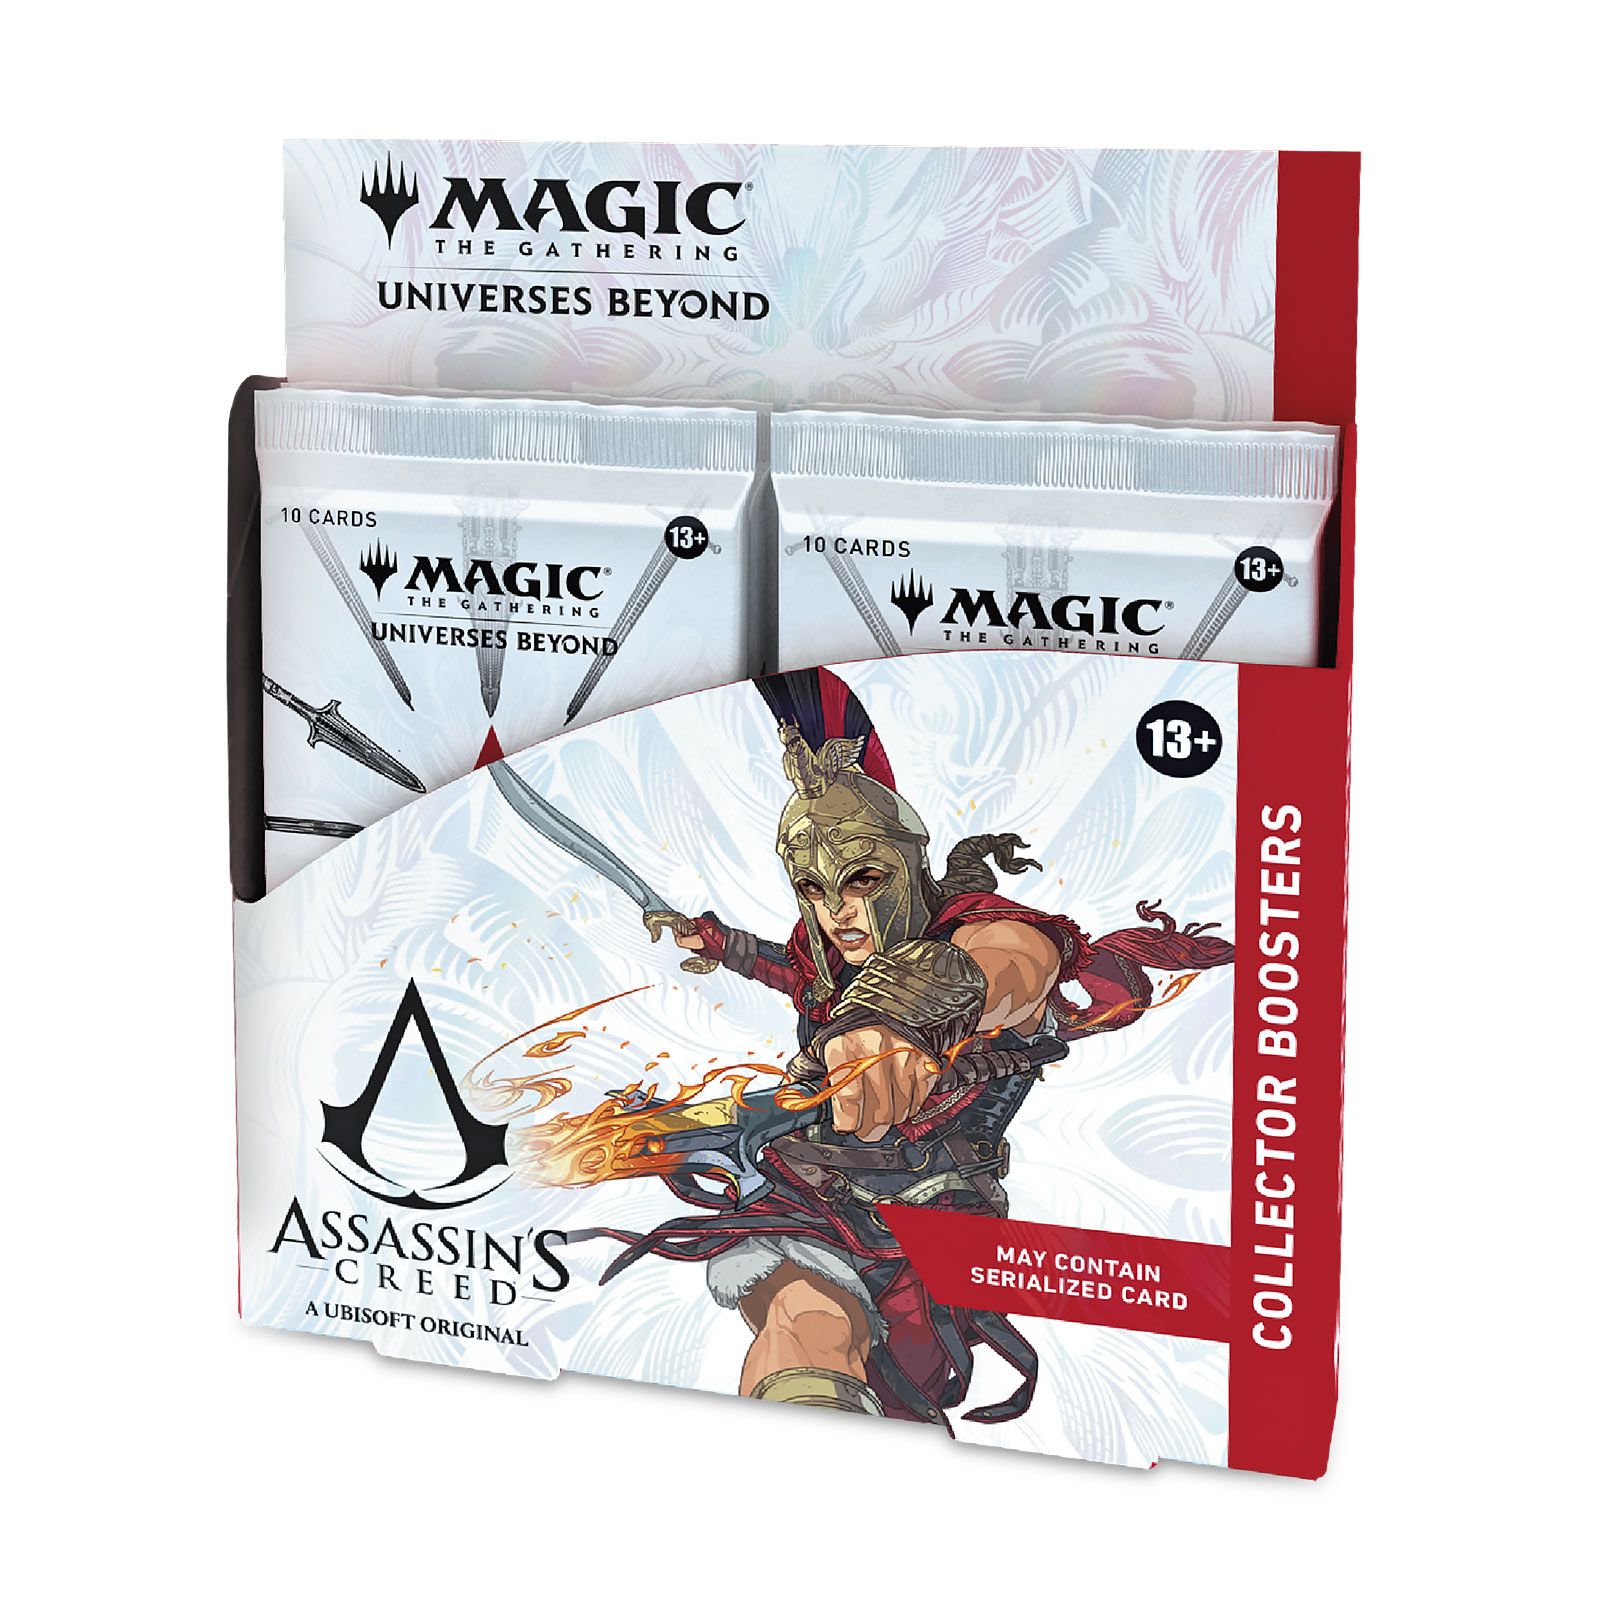 Assassin's Creed Collector Booster Display englische Version - Magic The Gathering